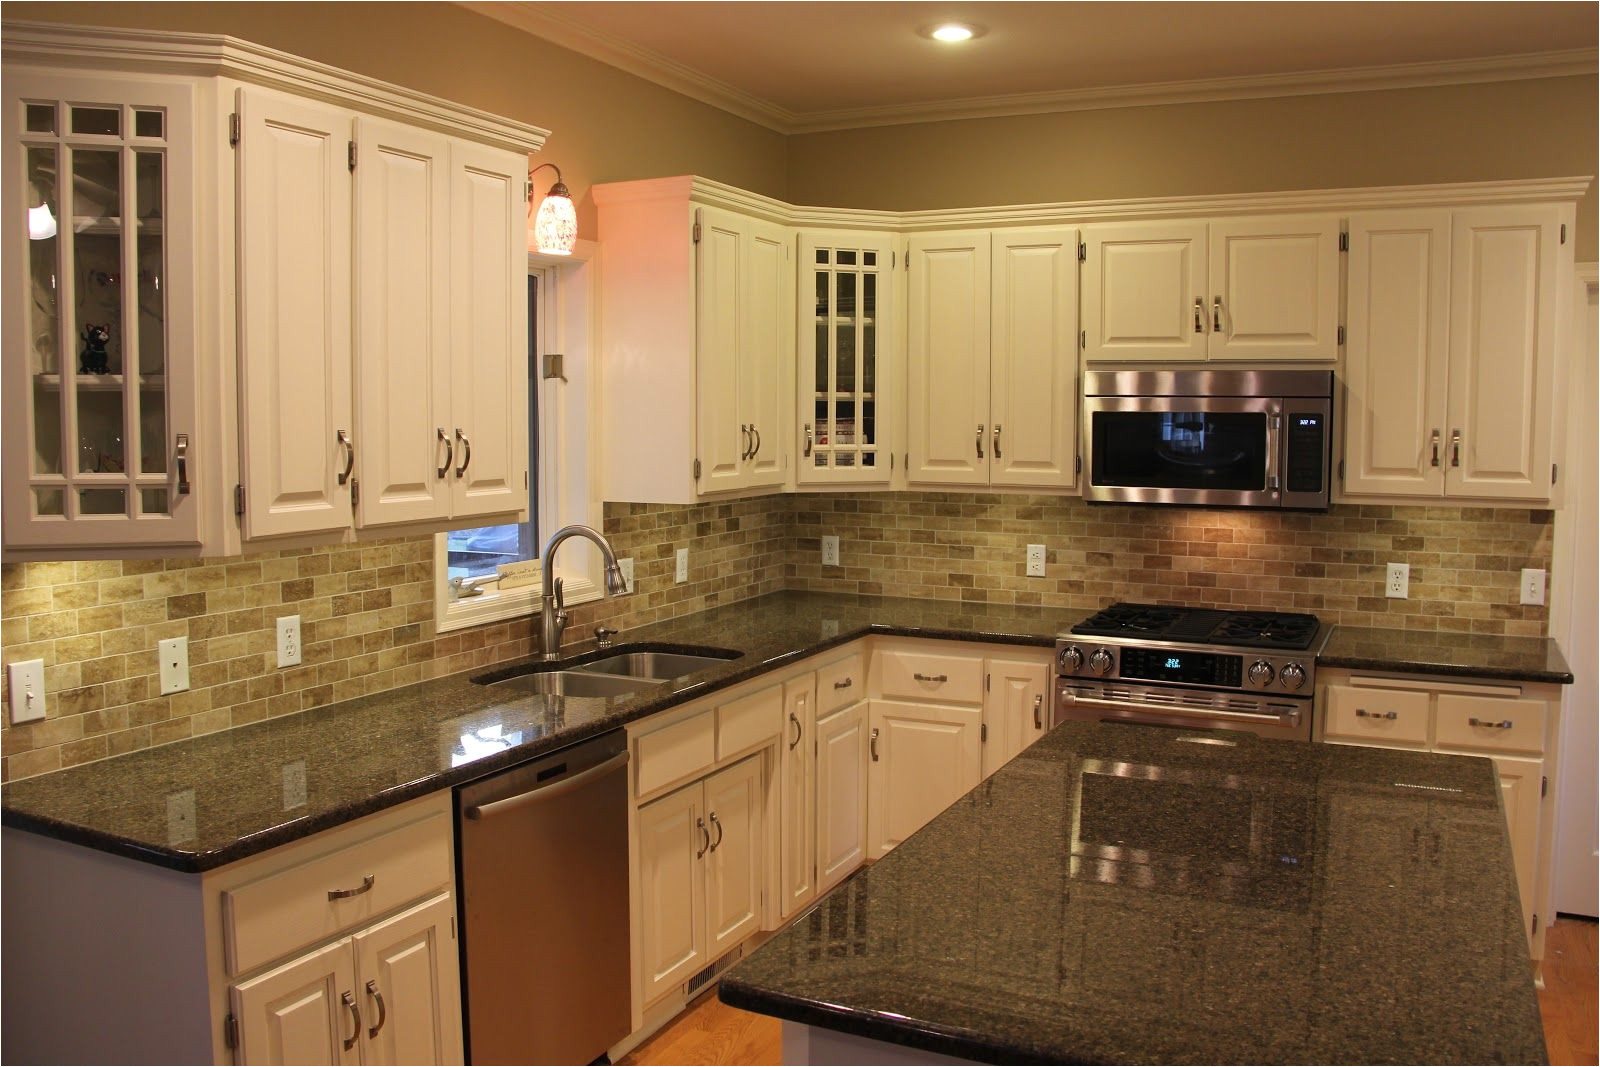 tile backsplashes with granite countertops black kitchen granite countertops with tile backsplash and white